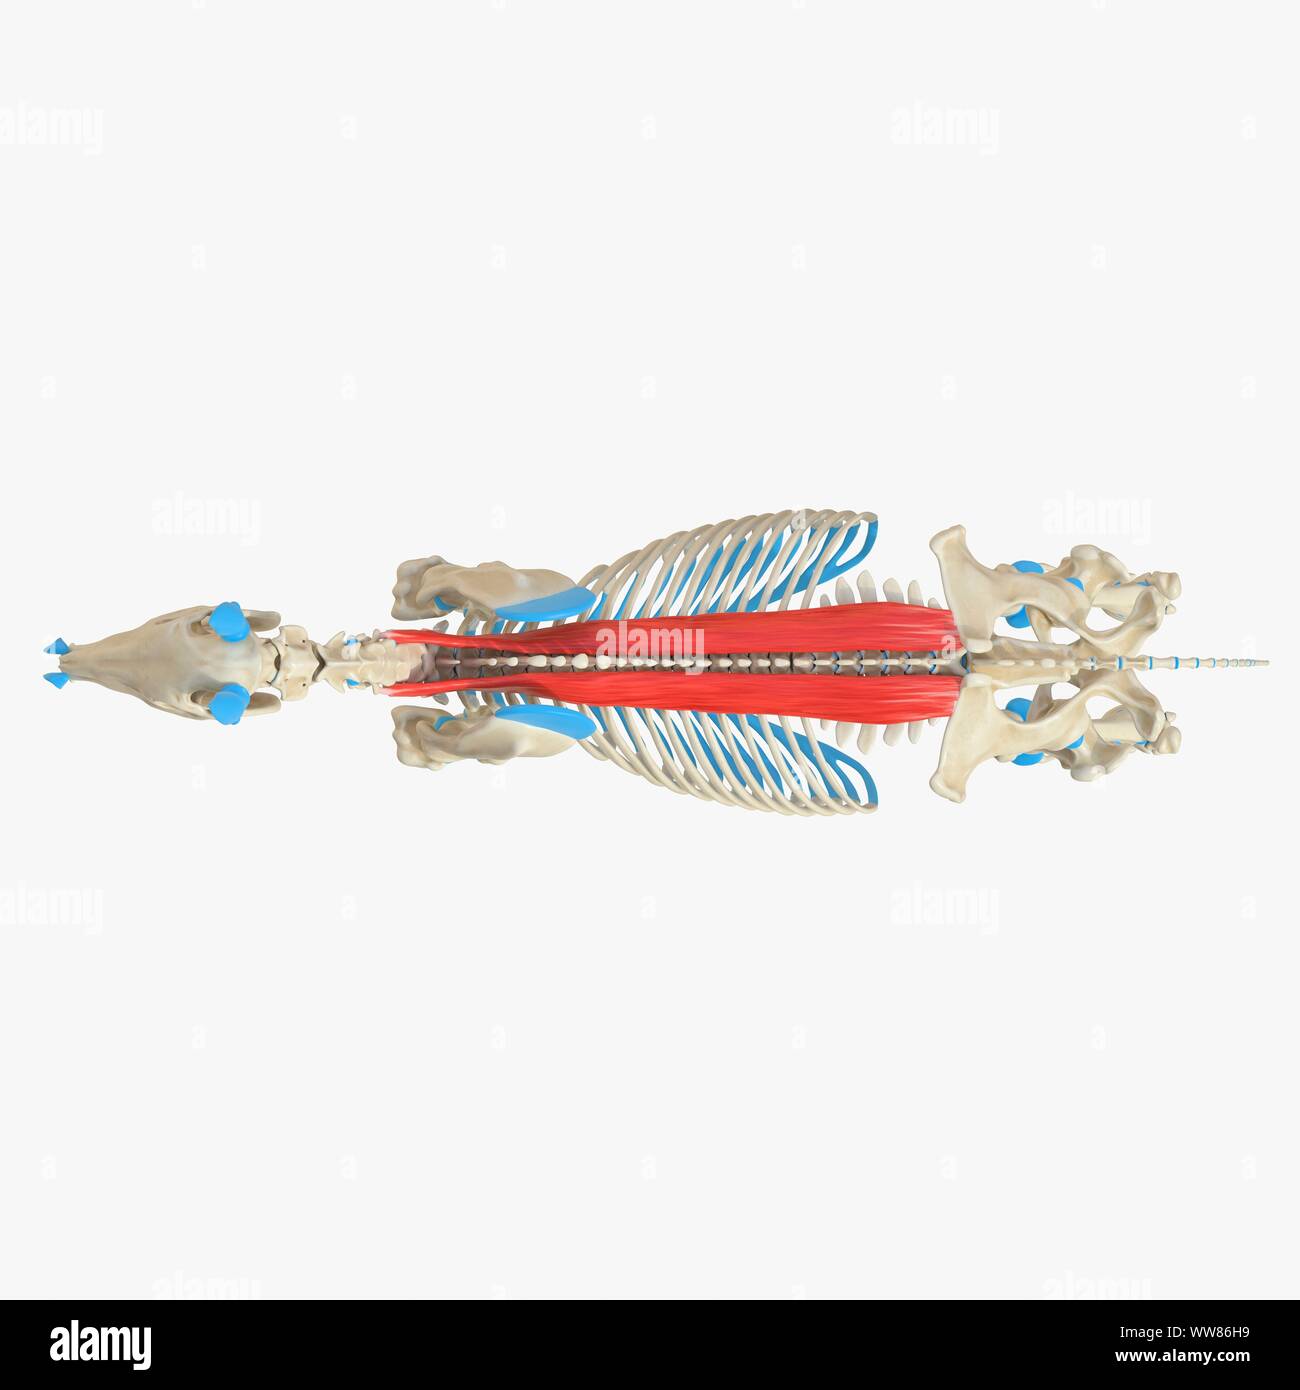 Horse spinalis muscle, illustration Stock Photo